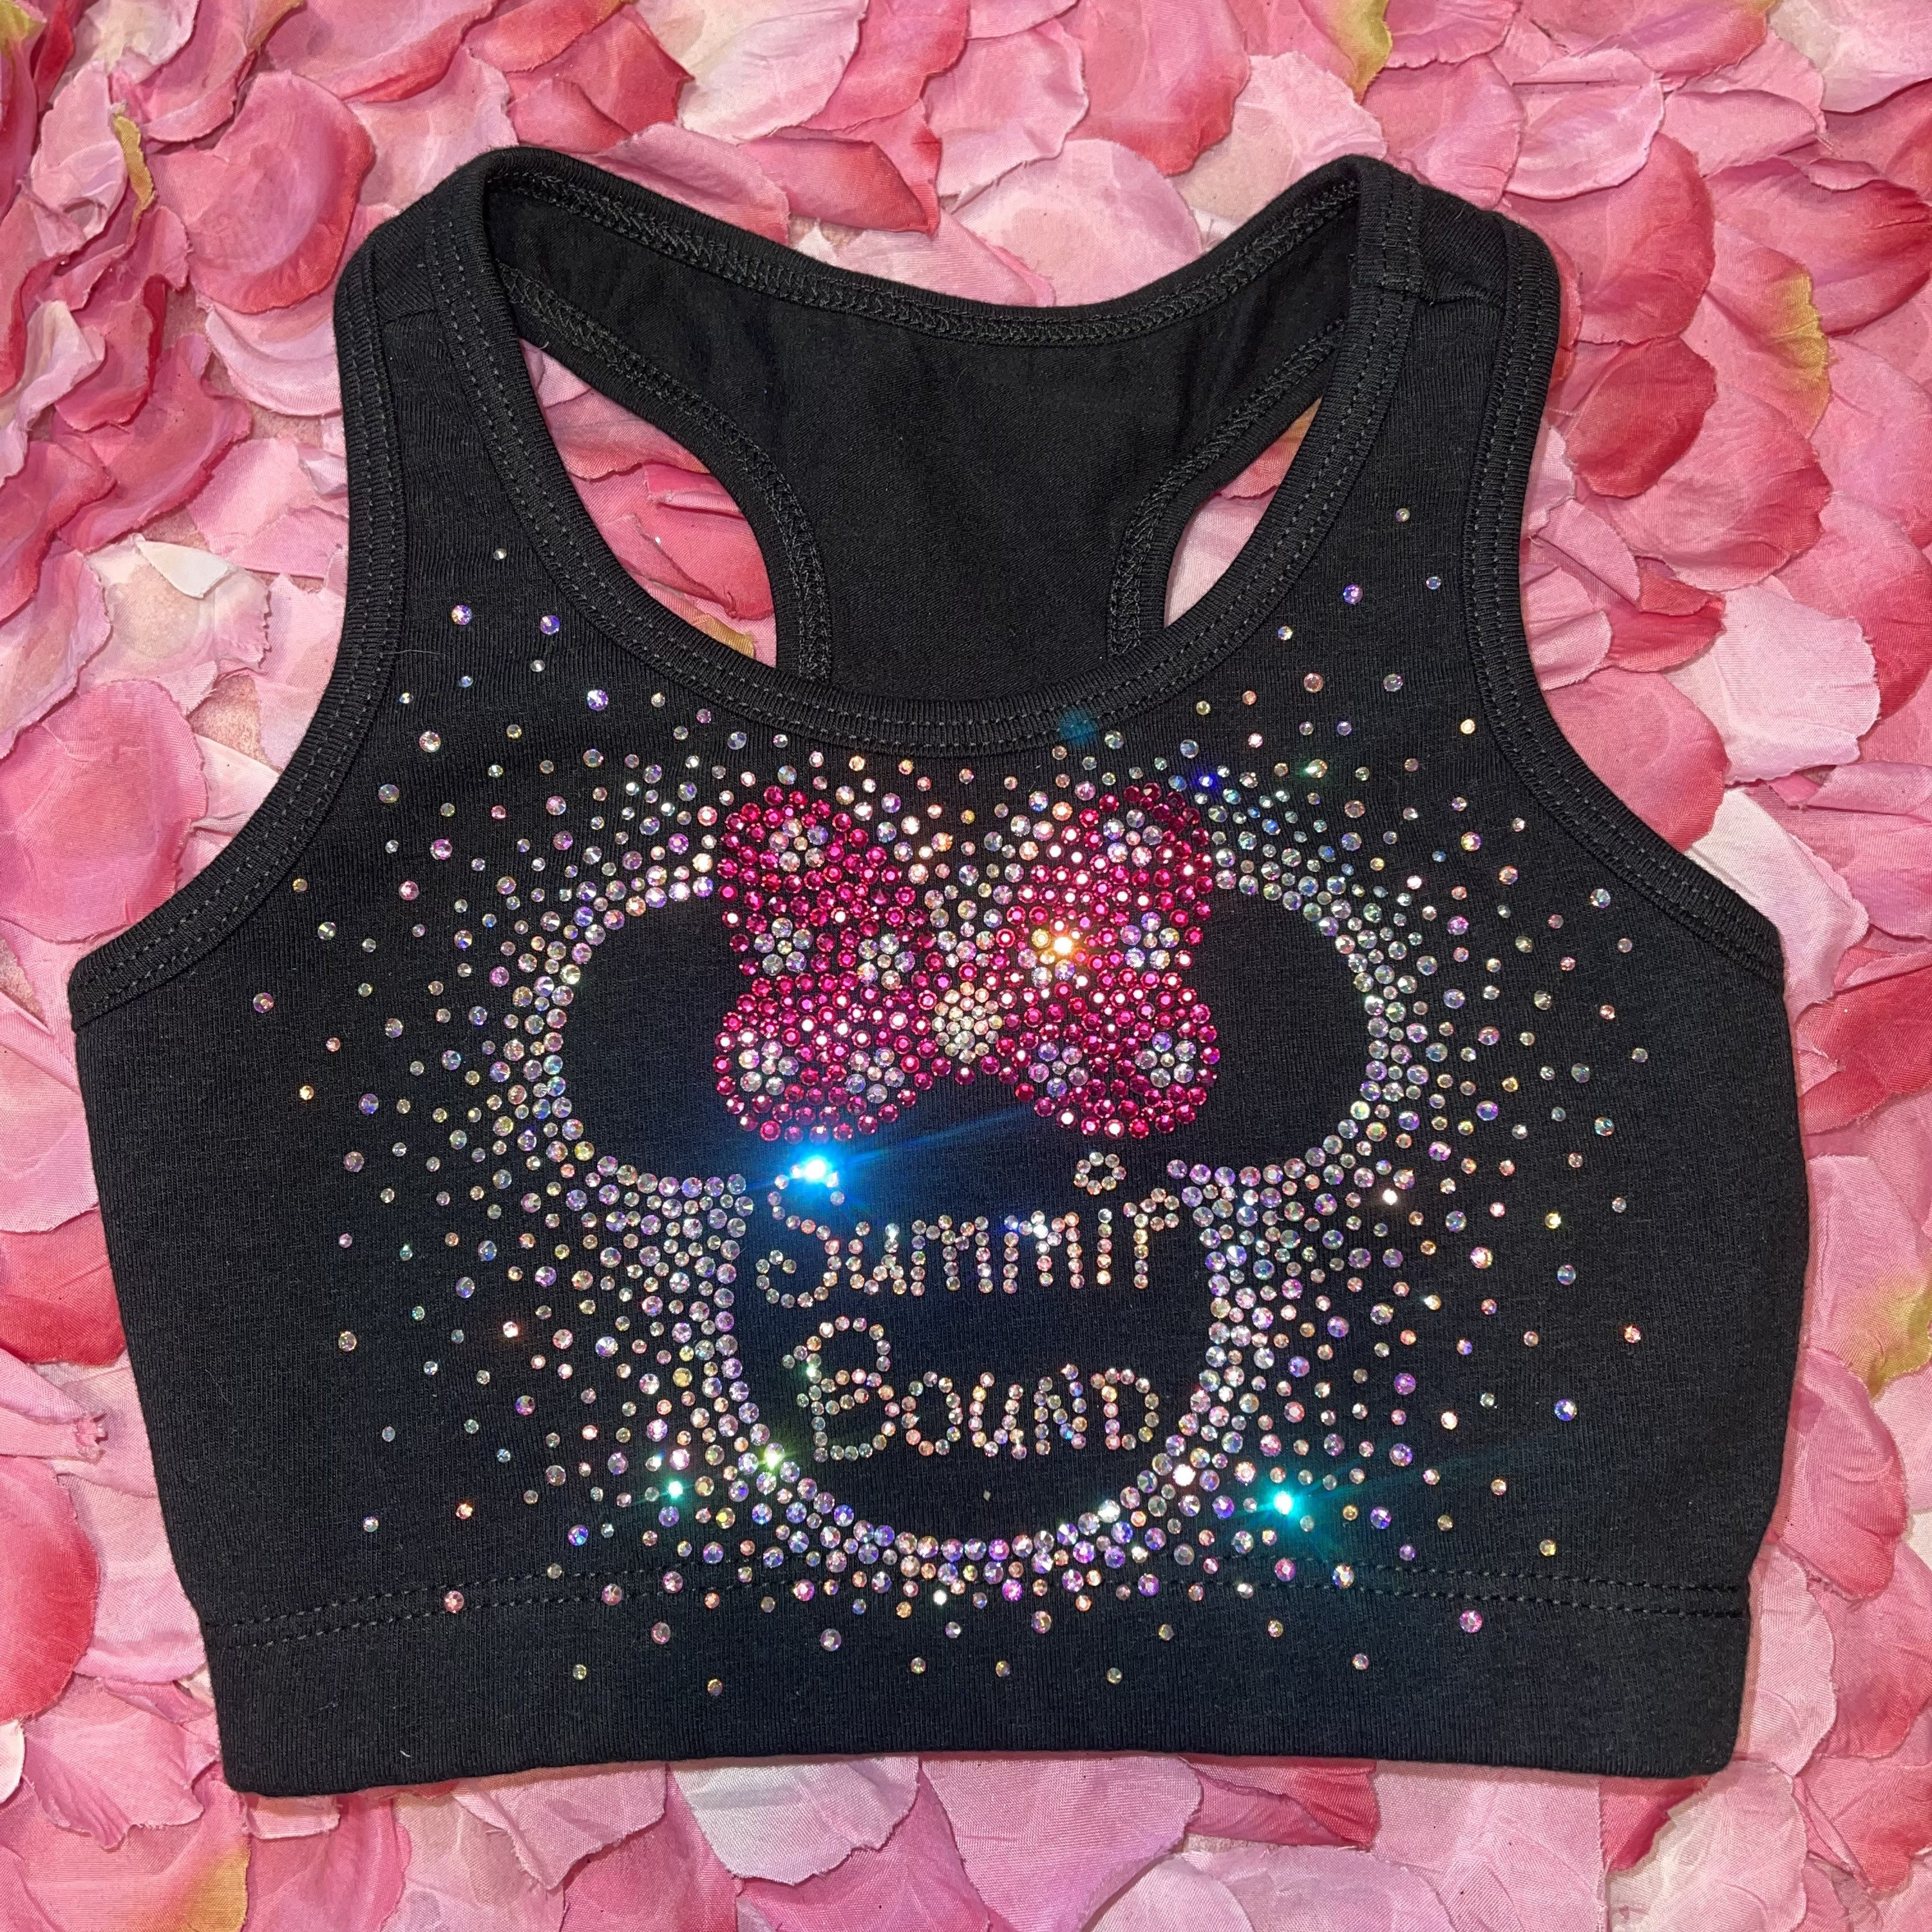 Summit Bound Scatter Rhinestone Mouse Ears Cheer Sports Bra -  Hong Kong